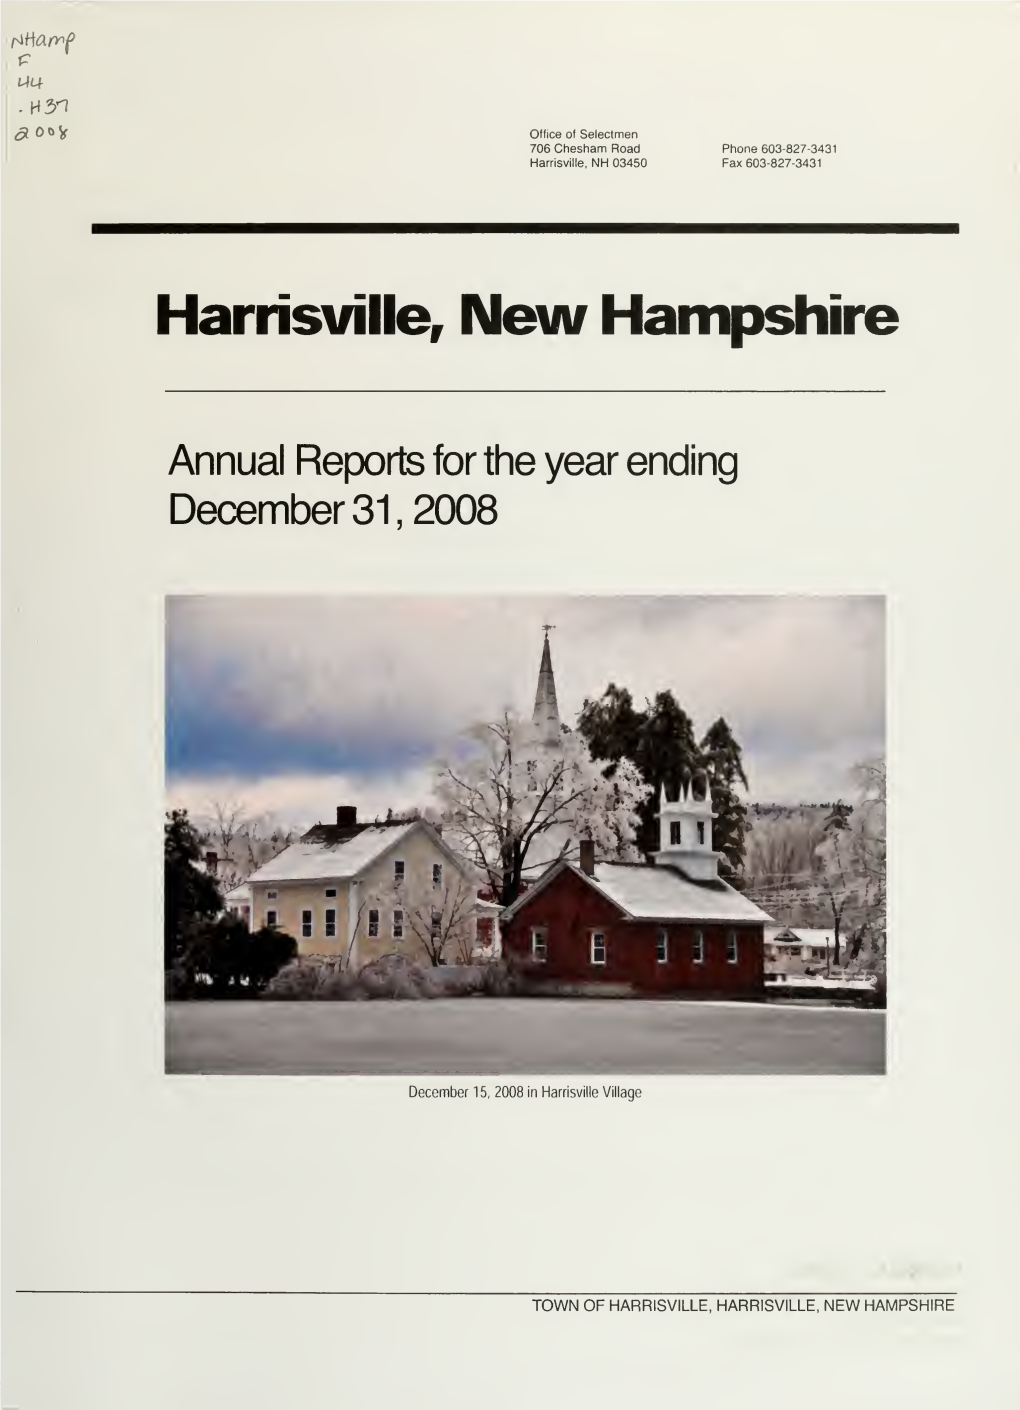 Town of Harrisville, Cheshire County, in the State of New Hanpshire